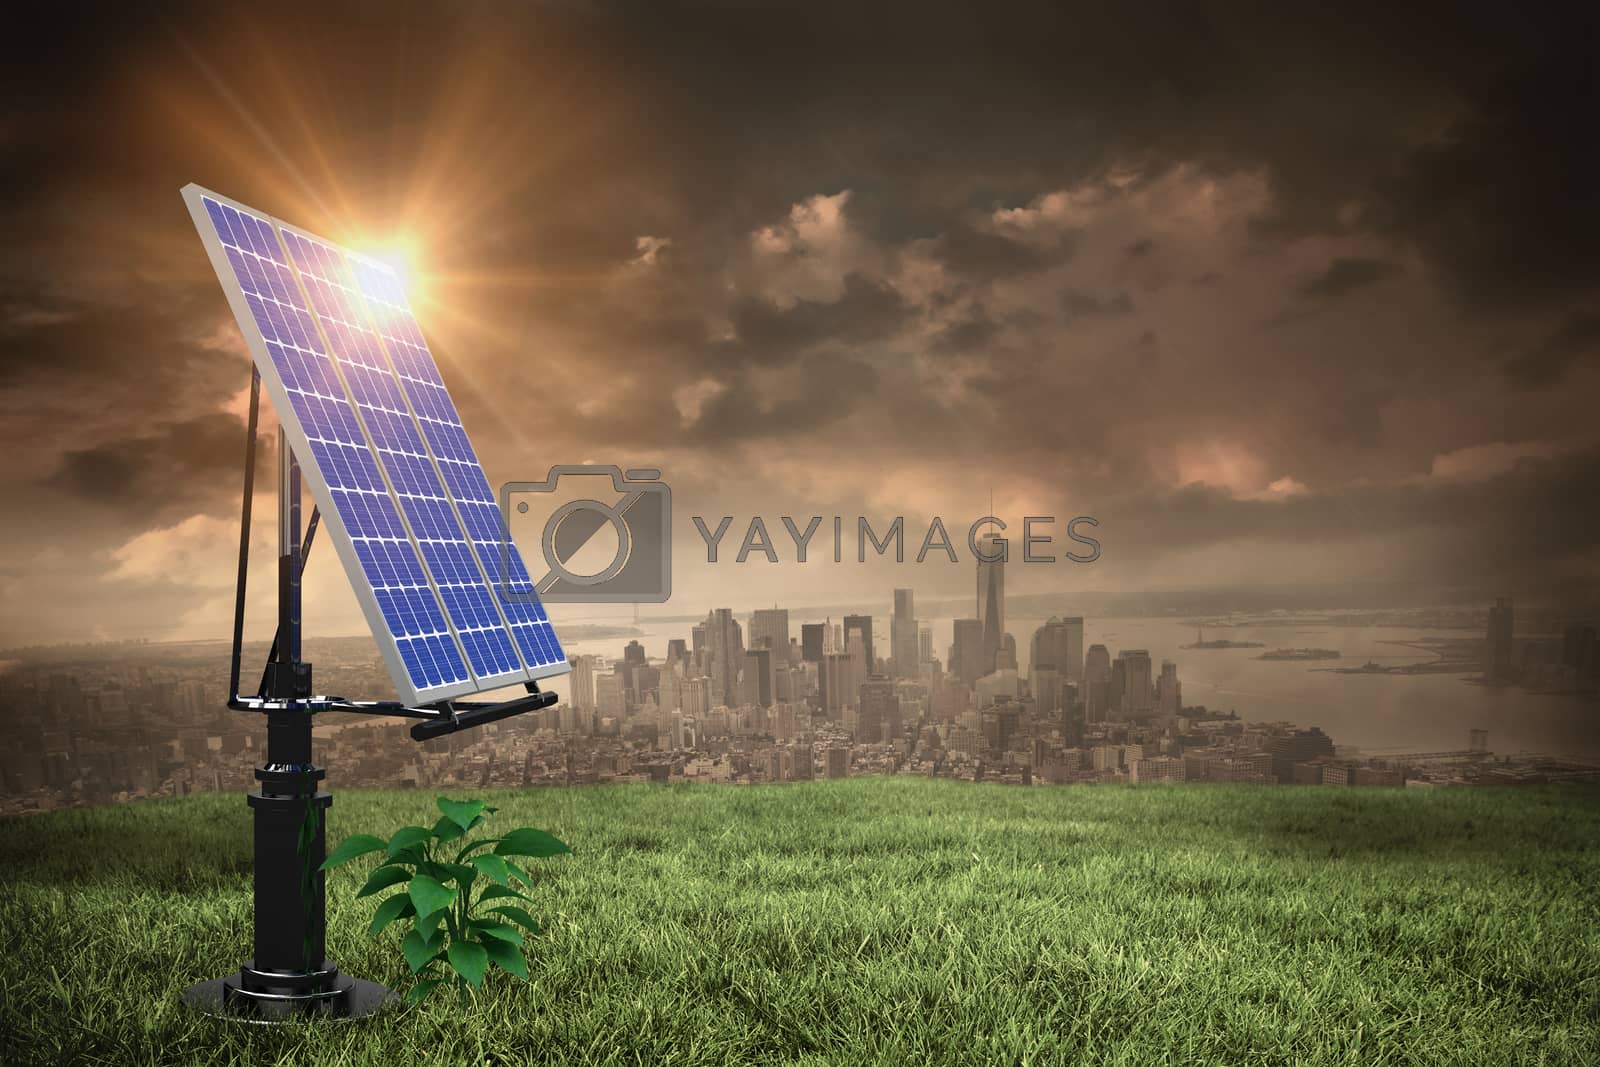 Royalty free image of Composite image of flare by Wavebreakmedia